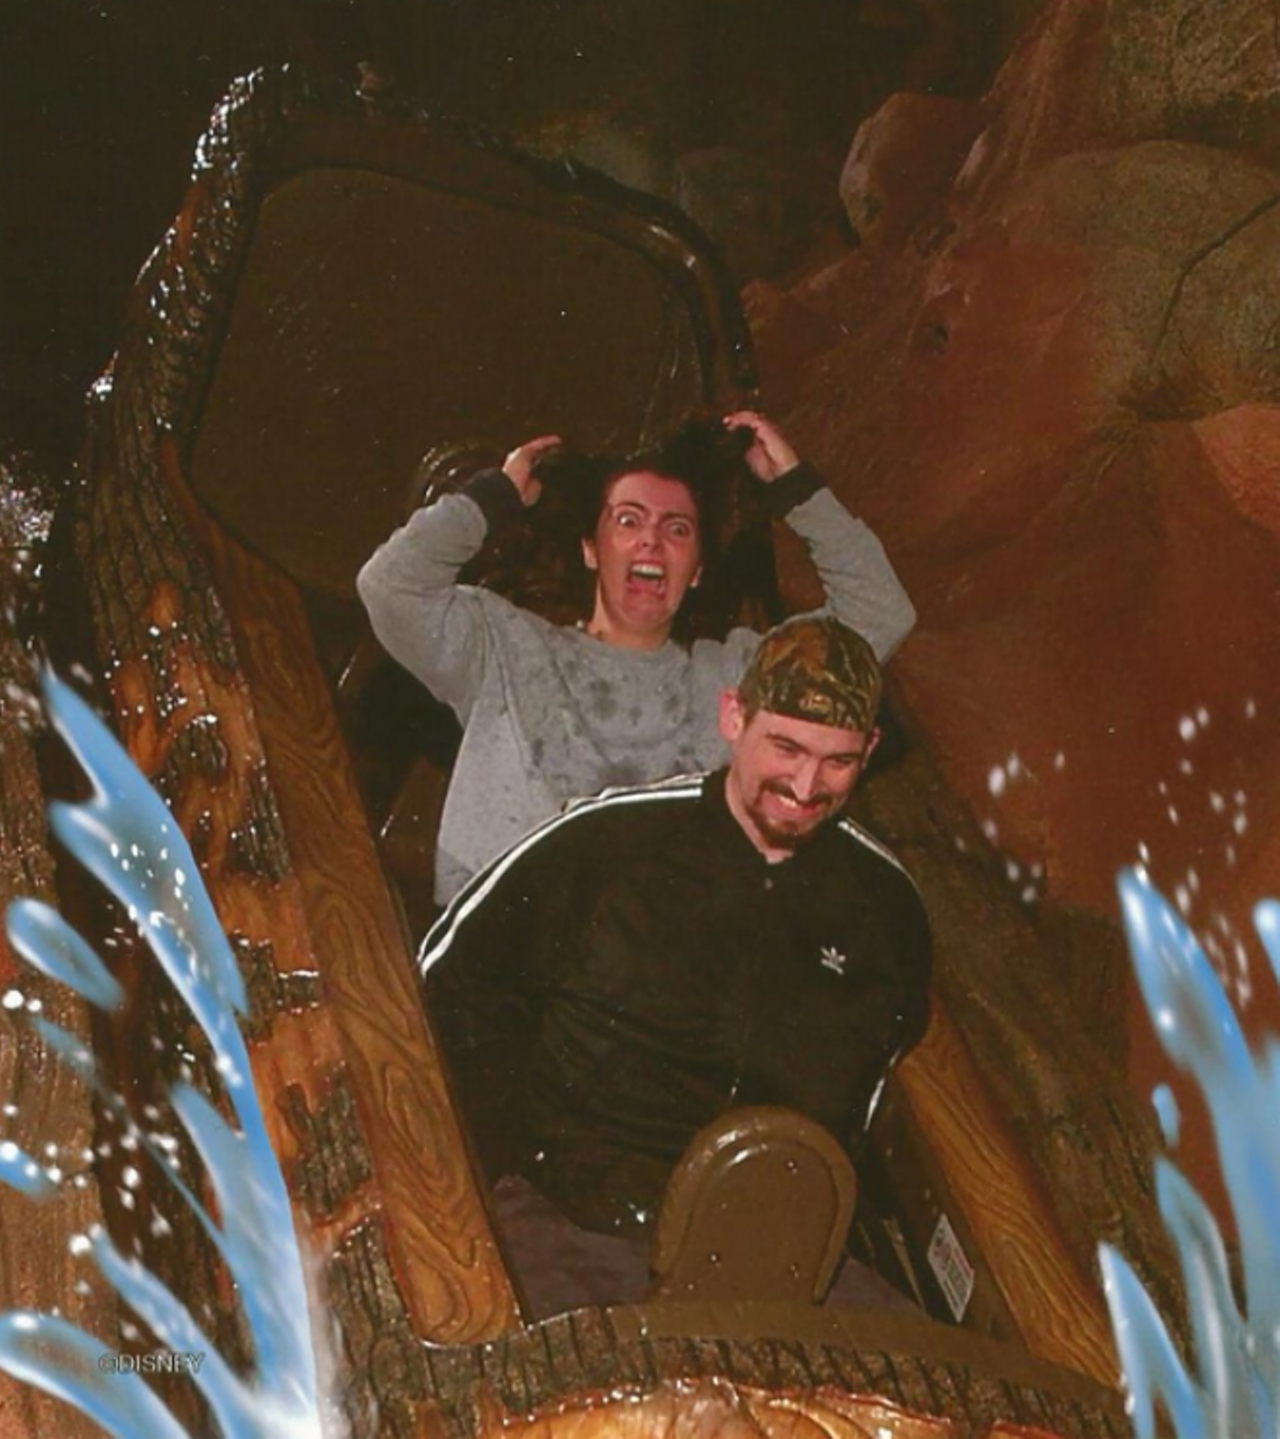 
Get the whole squad together by making everyone walk around together inside of a giant cardboard log. And, just the like the real Splash Mountain, be ready for photos with hilarious impromptu gags. Whoa! We're drunk on a log! 
Photo via Imgur